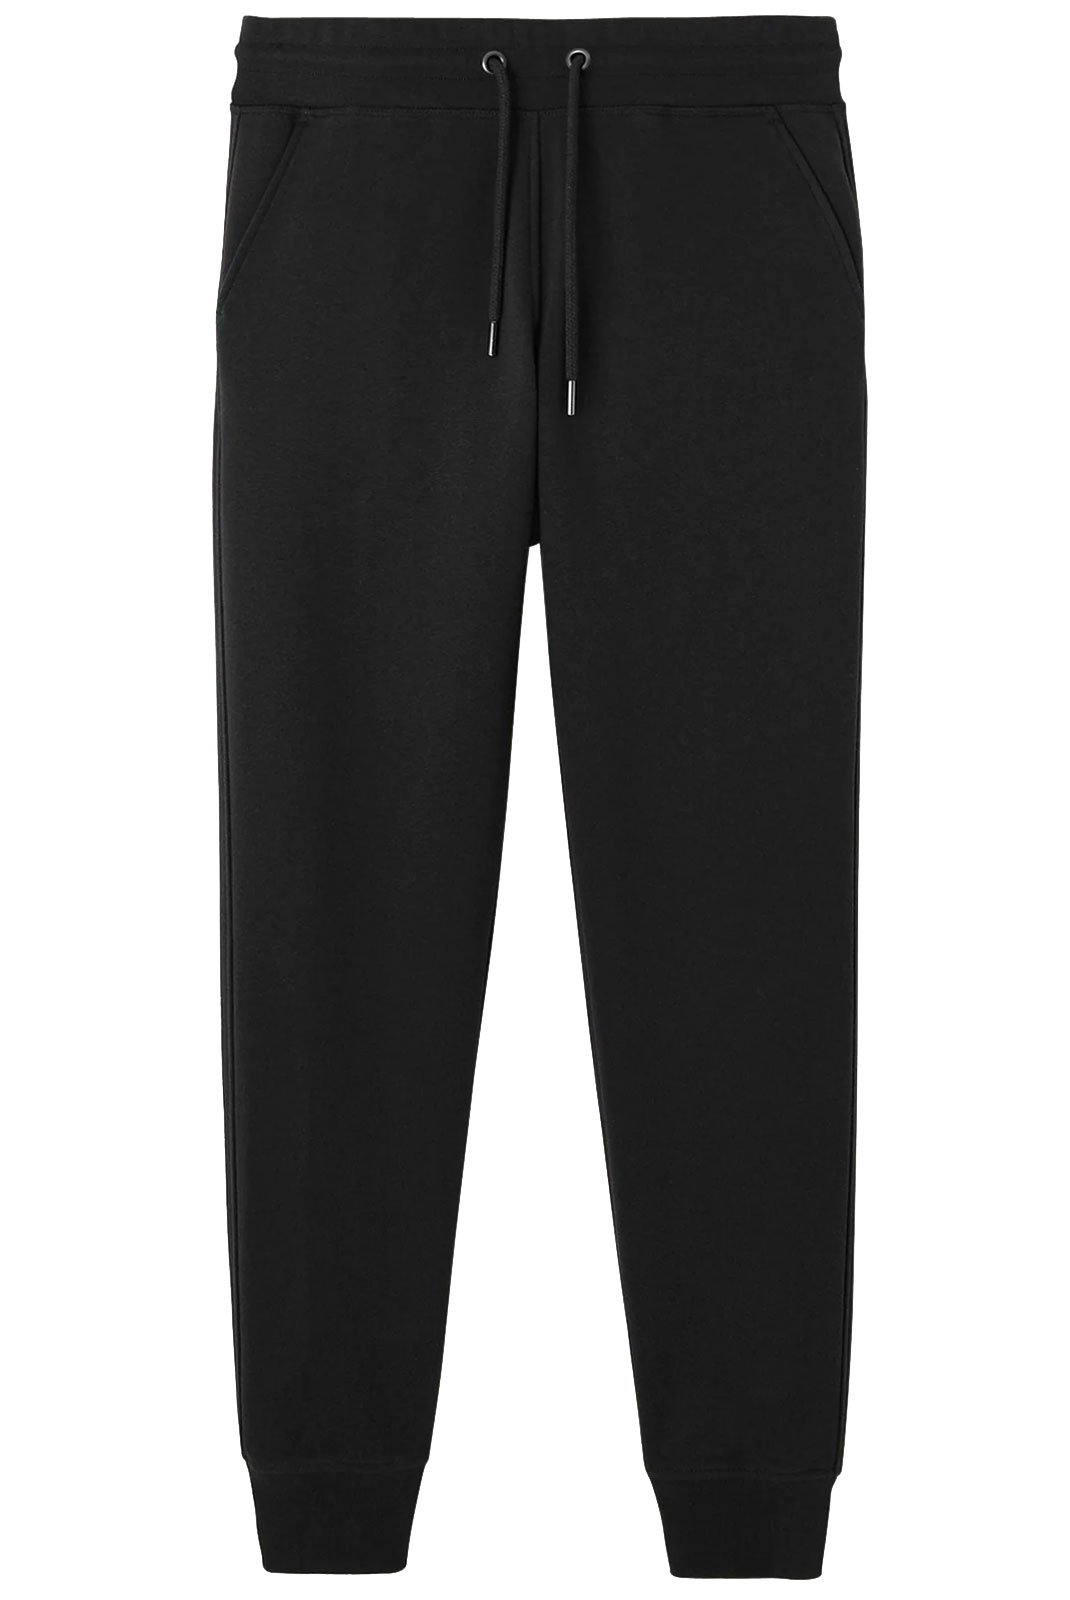 Pantalons  Just over the top VALPARAISO 999 BLACK